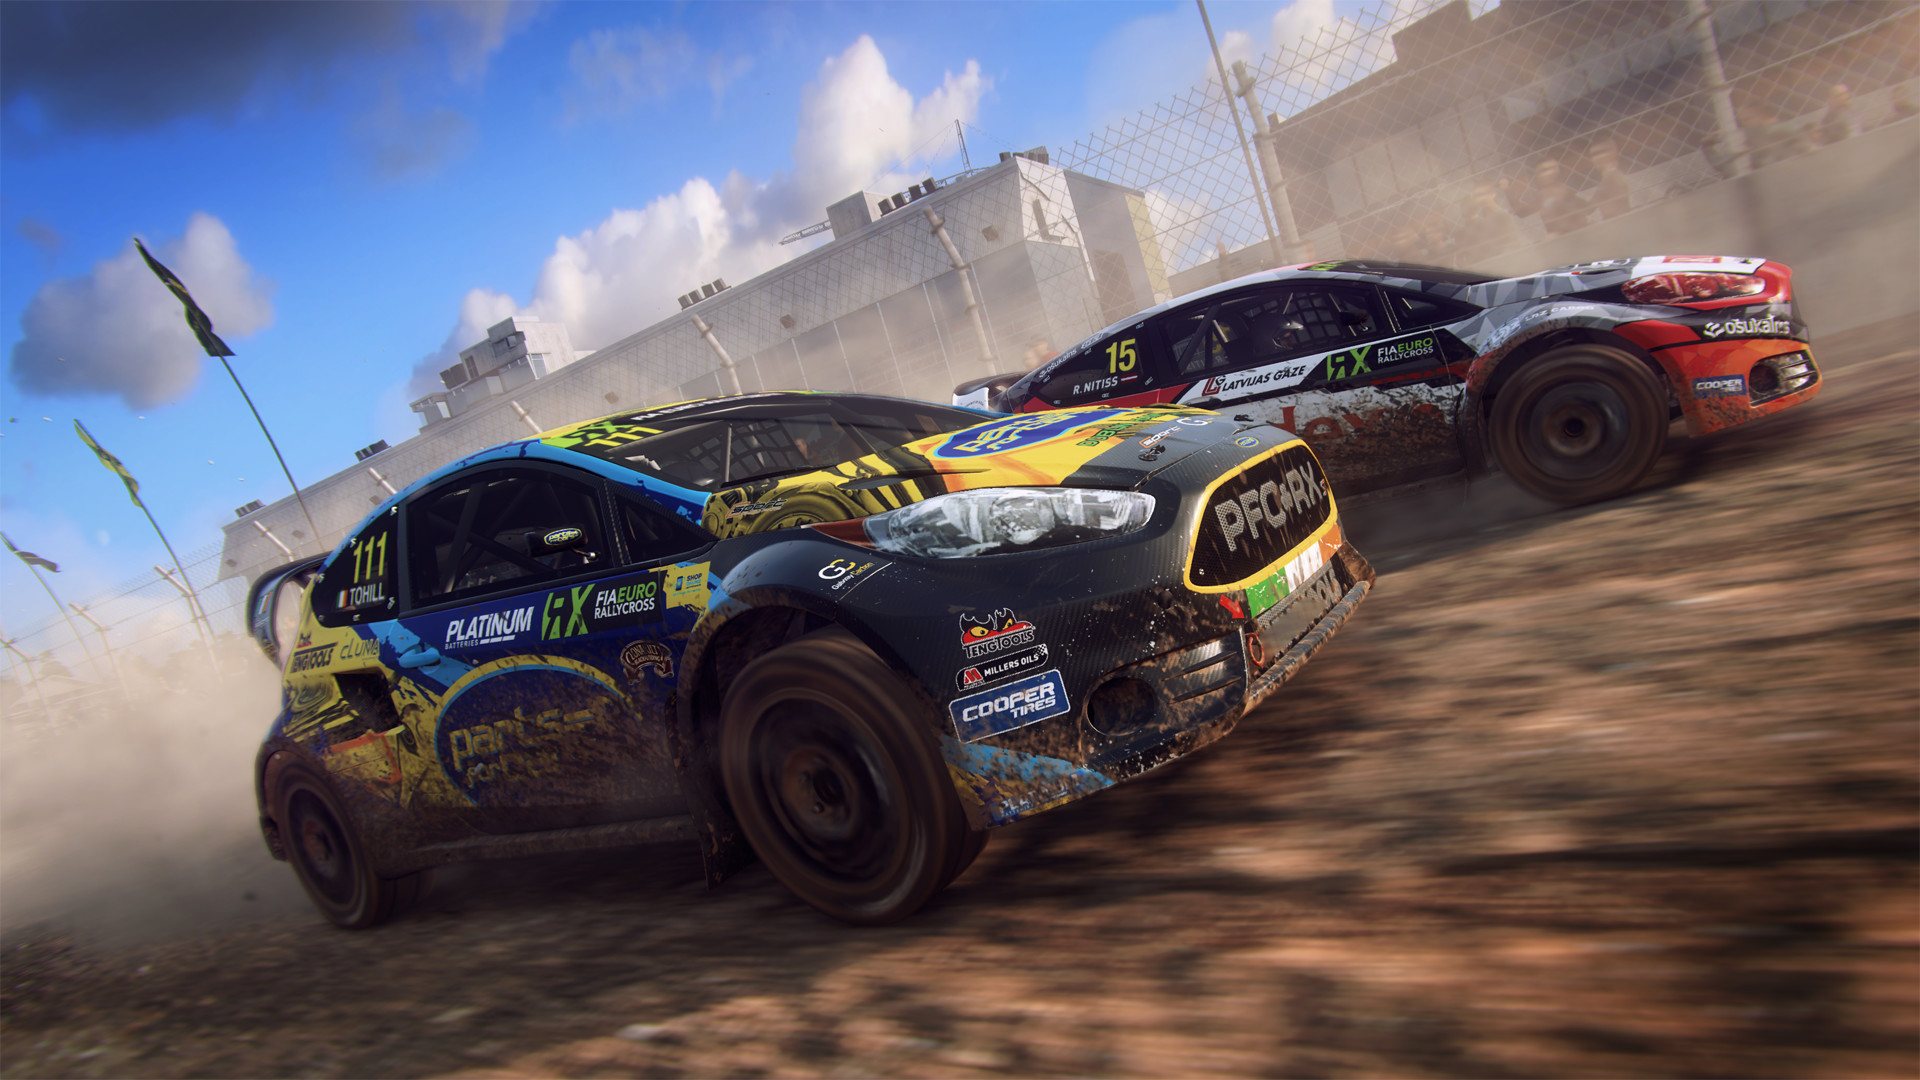 DiRT Rally 2.0 Deluxe Edition Steam Altergift